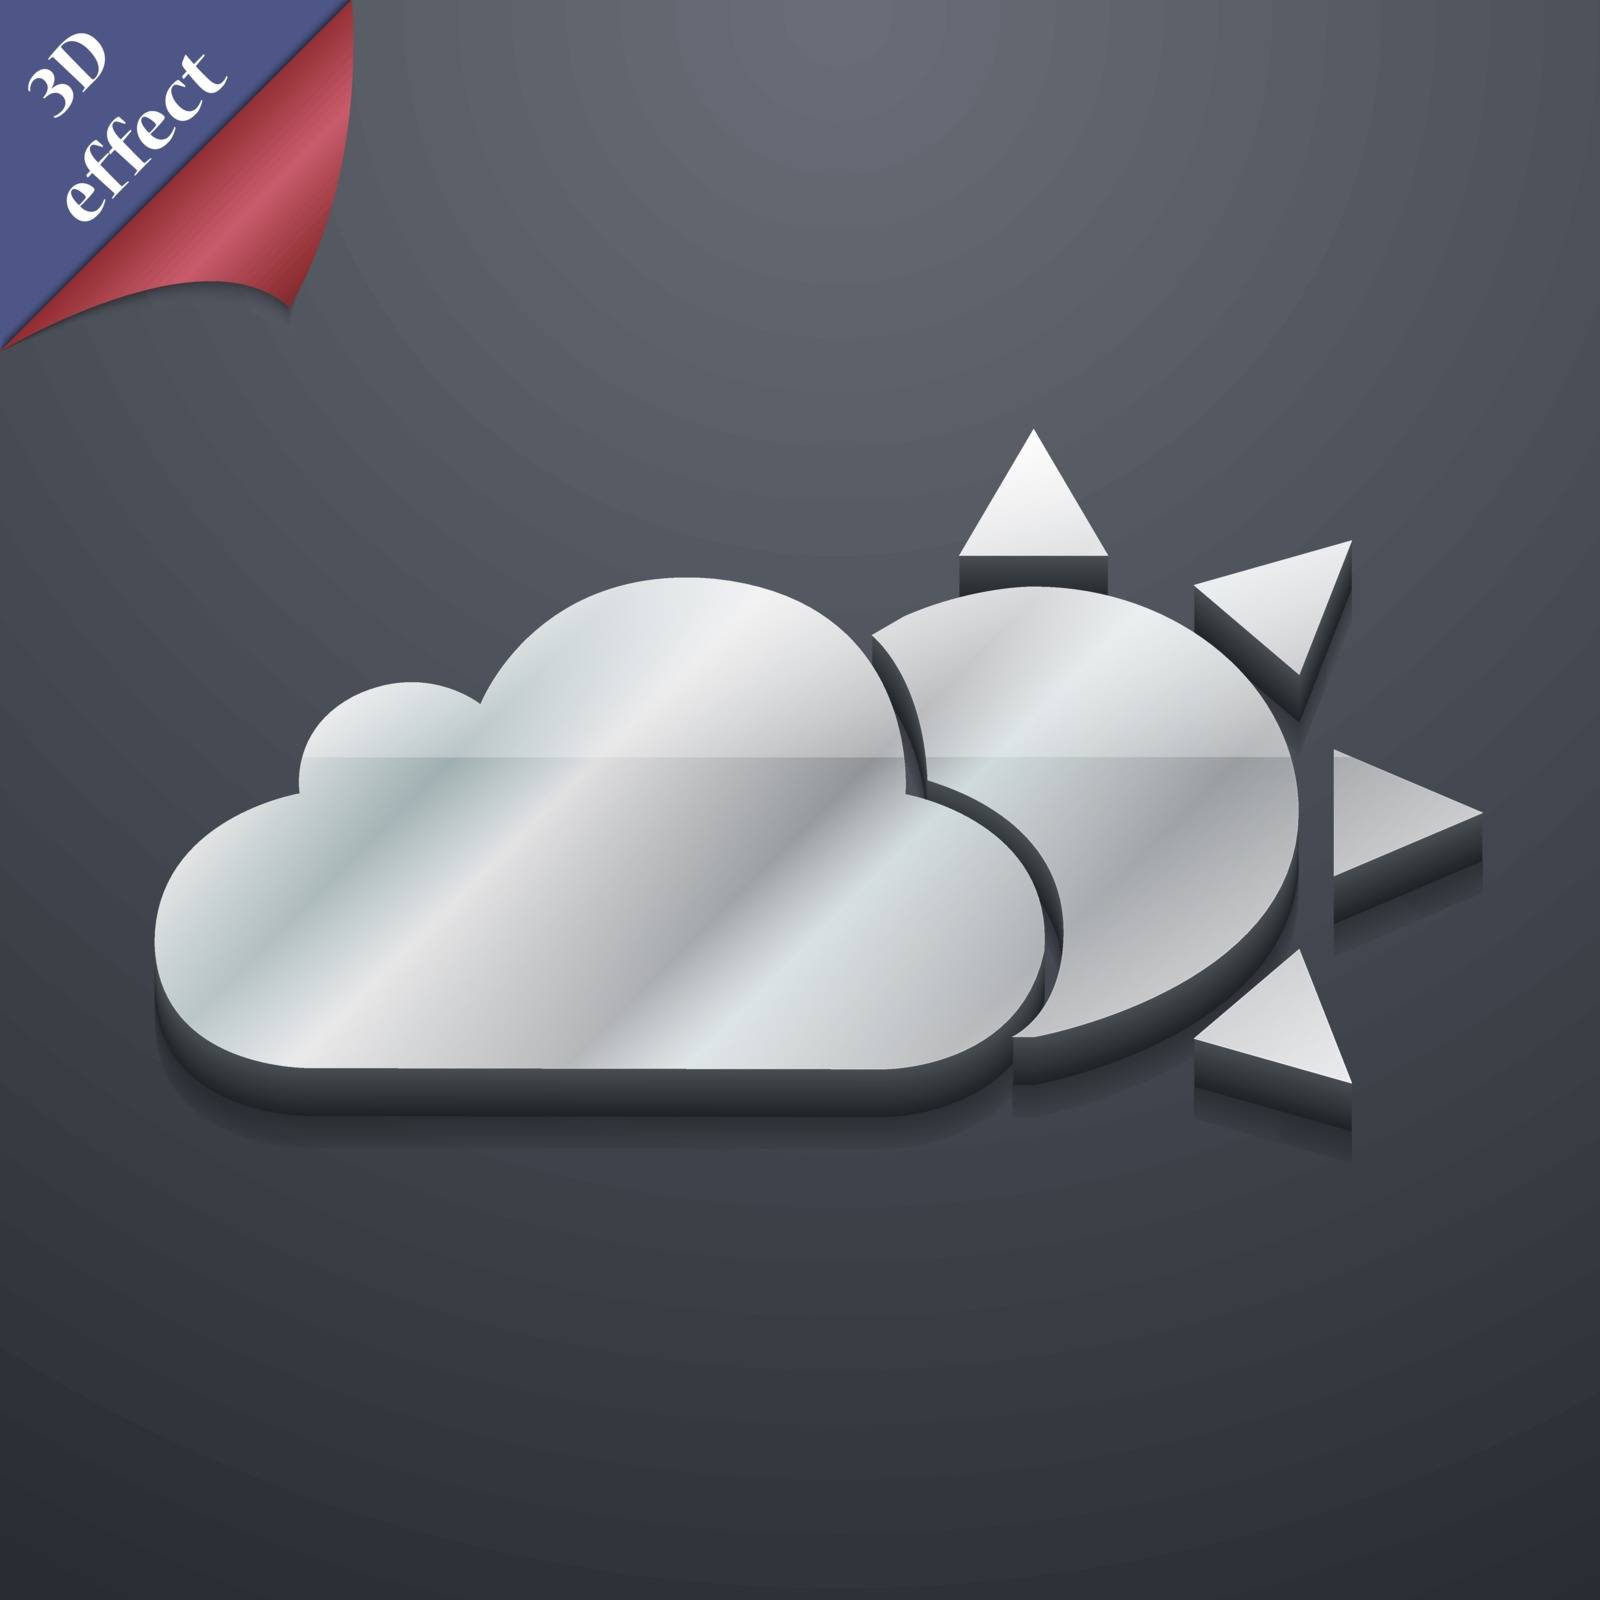 weather icon symbol. 3D style. Trendy, modern design with space for your text Vector illustration